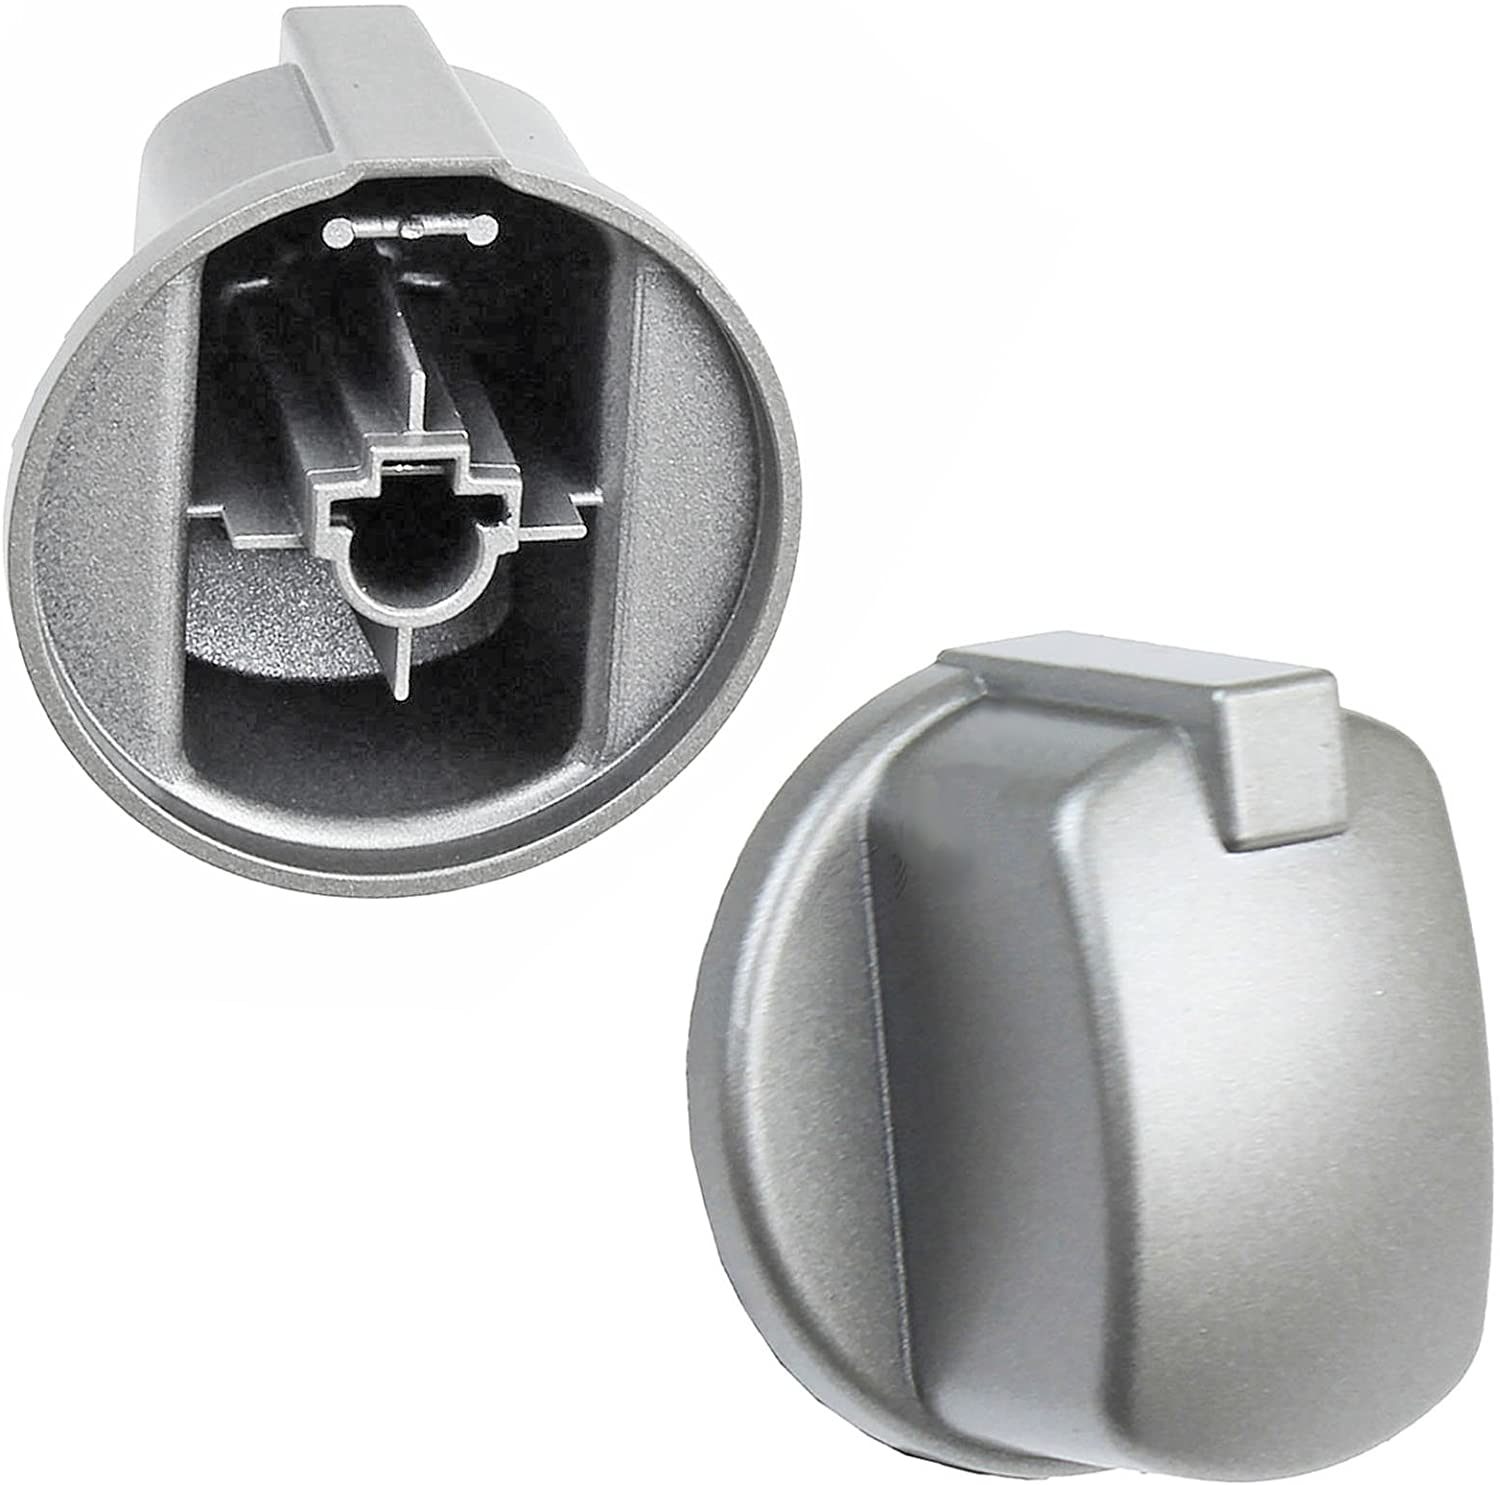 Control Knob Switch Button for HOTPOINT CIM53KCAIXGB Cooker Oven (Silver/INOX)